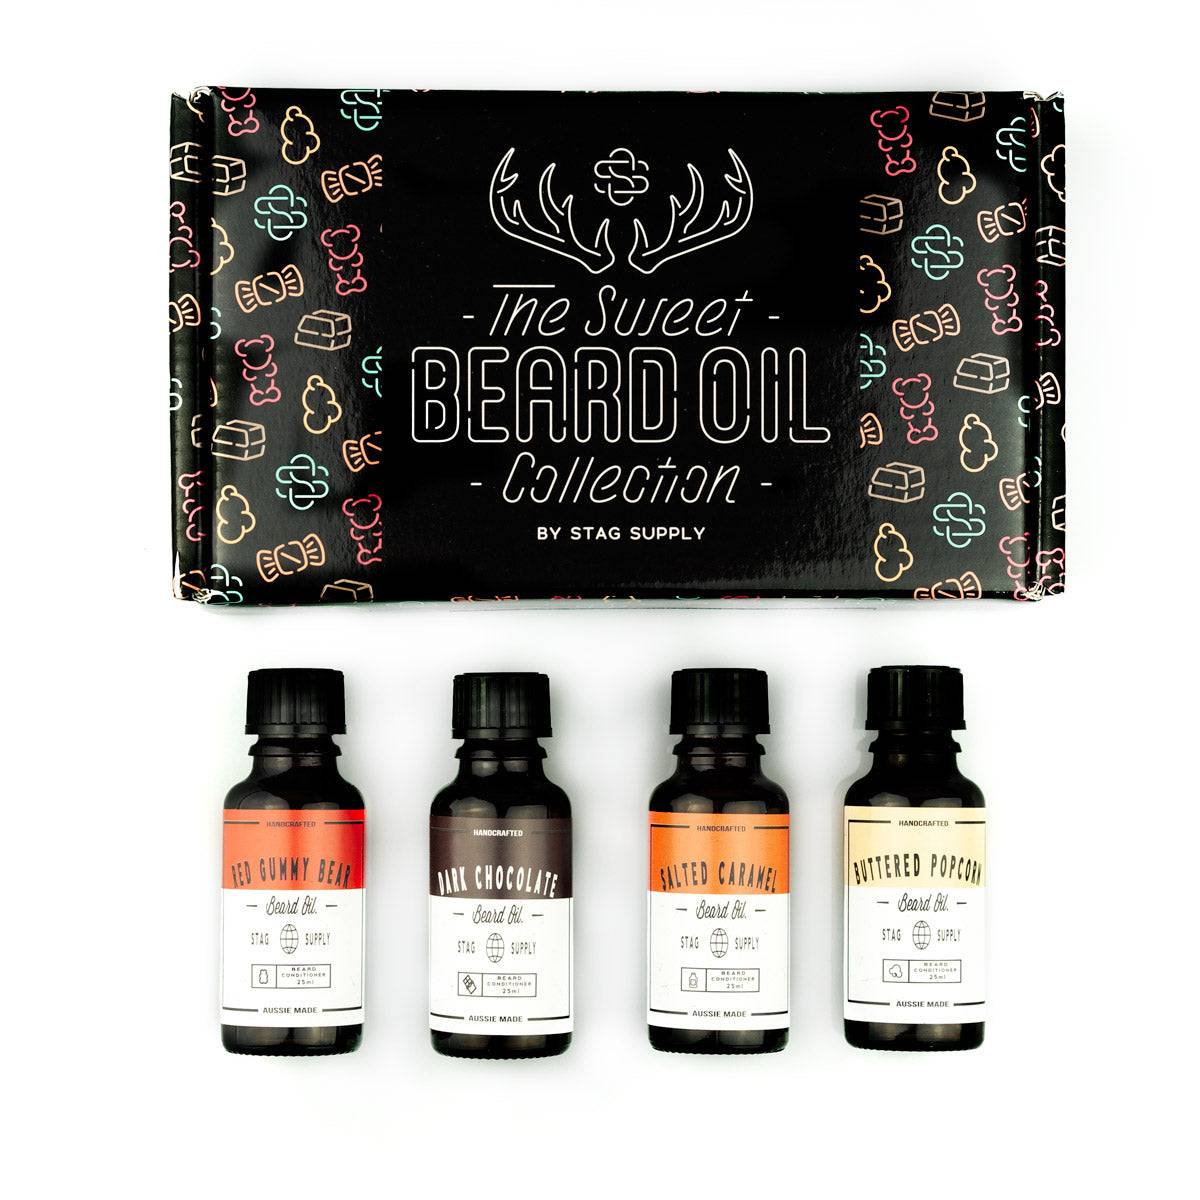 The Sweet Beard Oil Collection